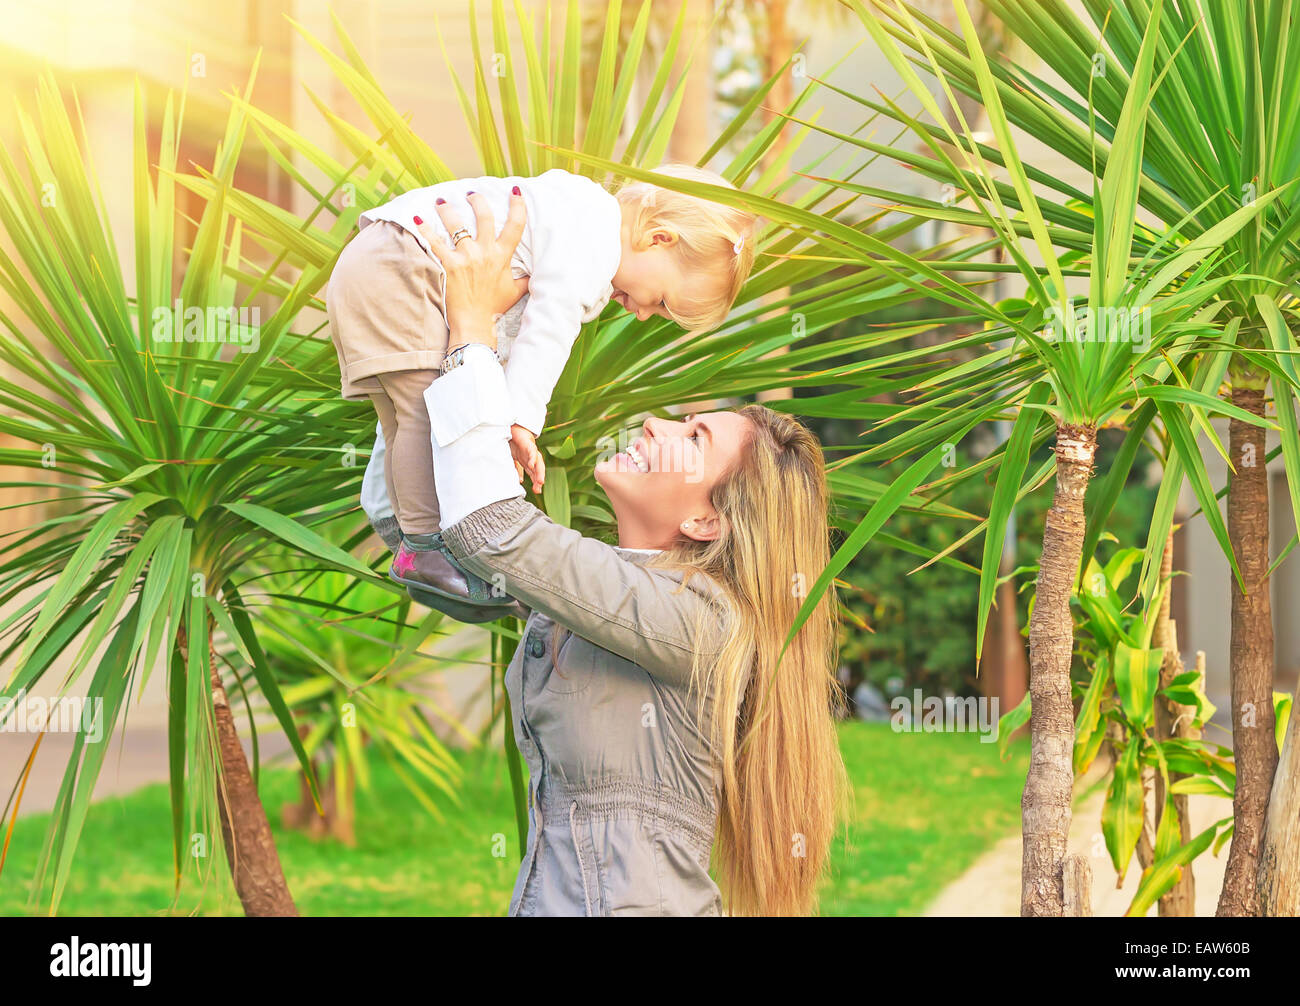 Cheerful woman with baby in fresh green palm parc, femme soulevant sa mignonne petite fille Banque D'Images